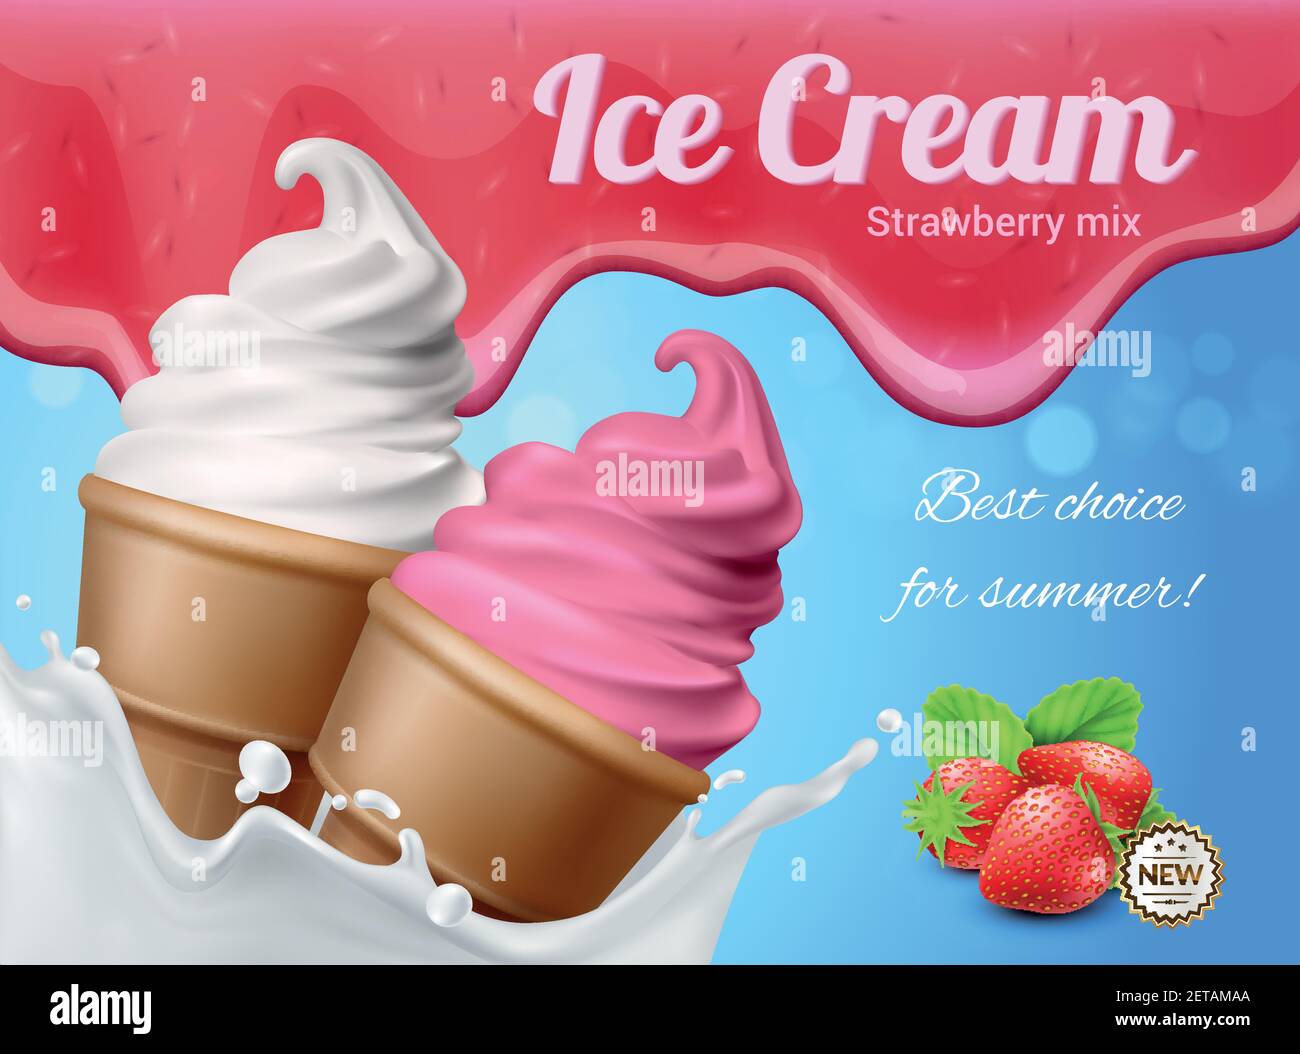 Ice cream realistic advertising composition with editable text and images of two icecream cornets with berries vector illustration Stock Vector